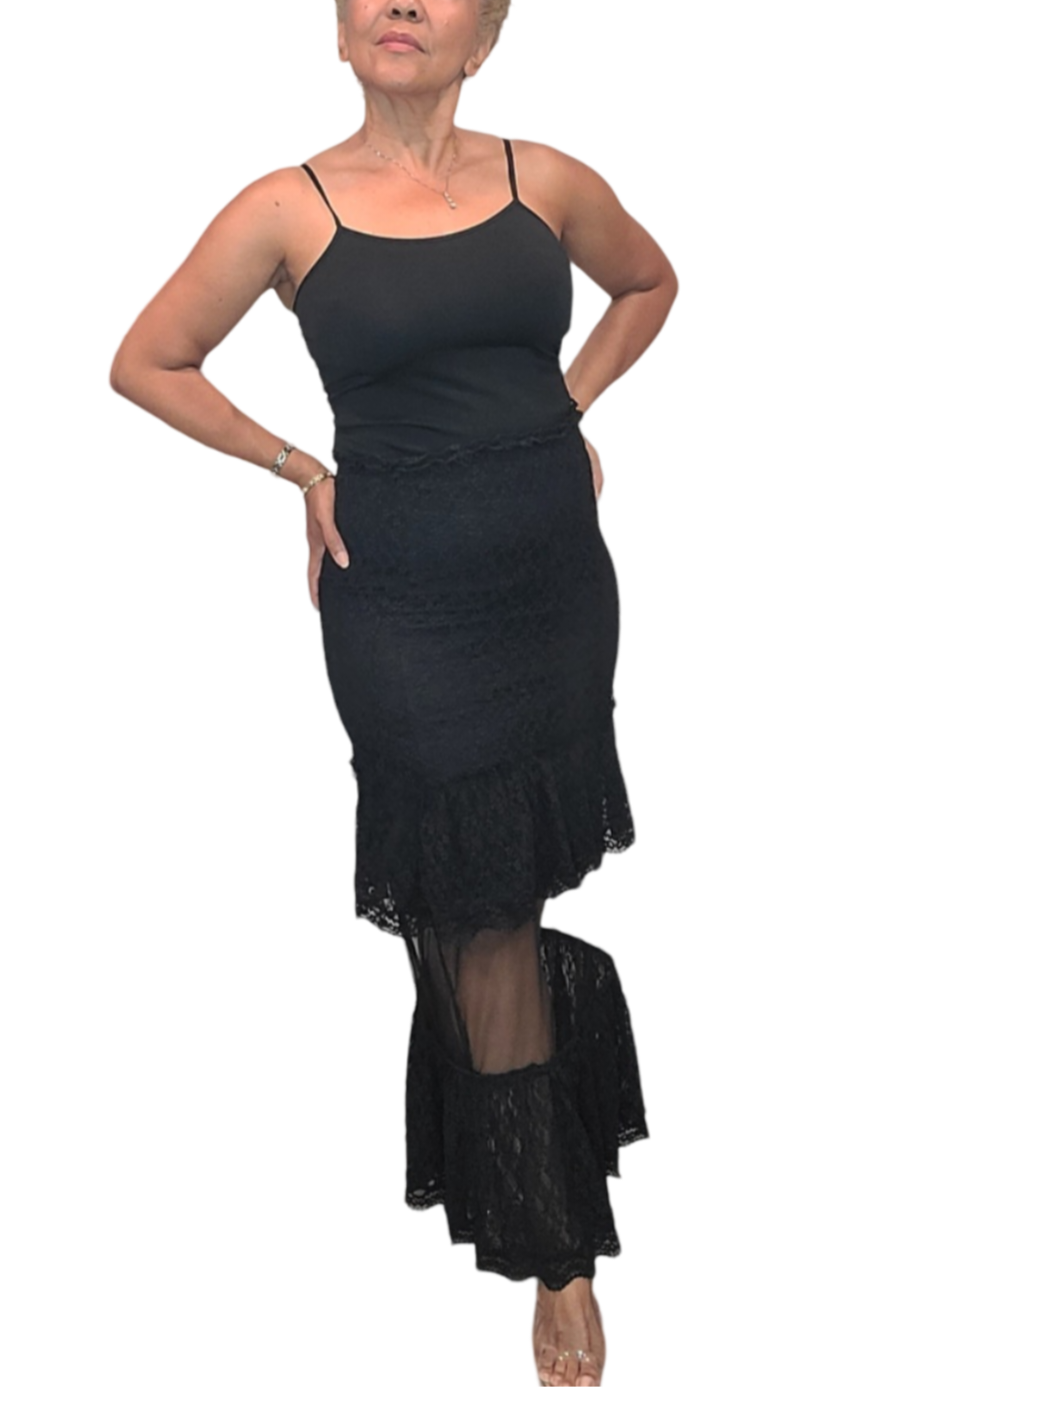 Hot Long Skirt. Raise the temperature of emotions and desires, not the temperature of Mother Earth. Prevent climate change.  This skirt is flattering with cascading ruffle design on hem. Sexy sheer makes a statement. Eye catching.  It's all in the...